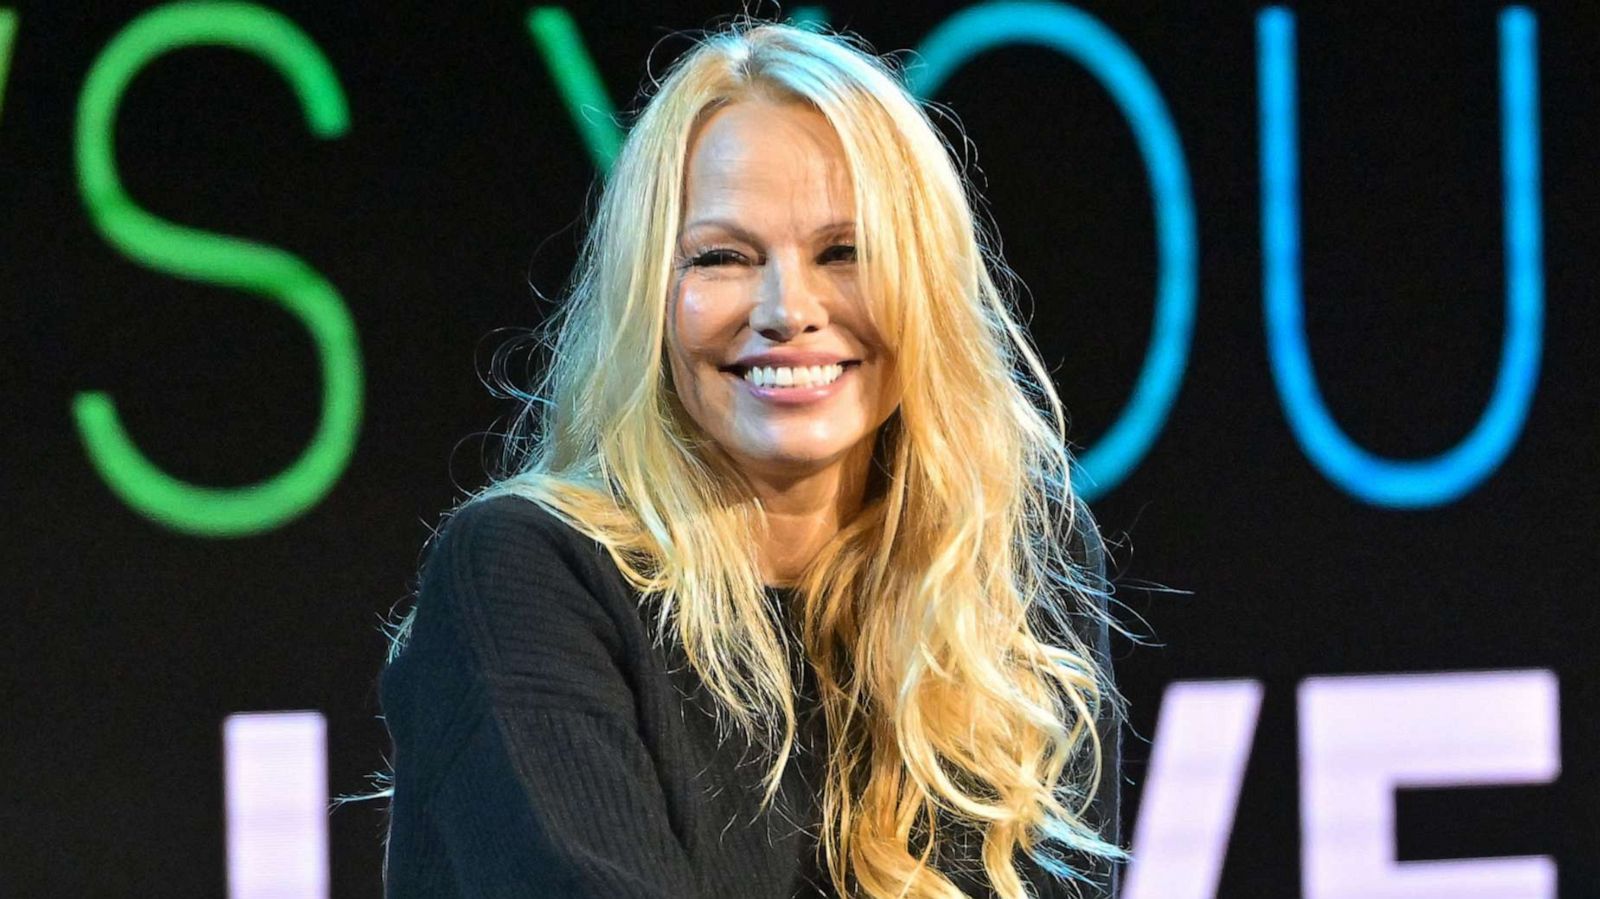 Wow Girls Porn Star Pam - Pamela Anderson says giving up makeup is 'freeing, fun and a little  rebellious, too' - Good Morning America